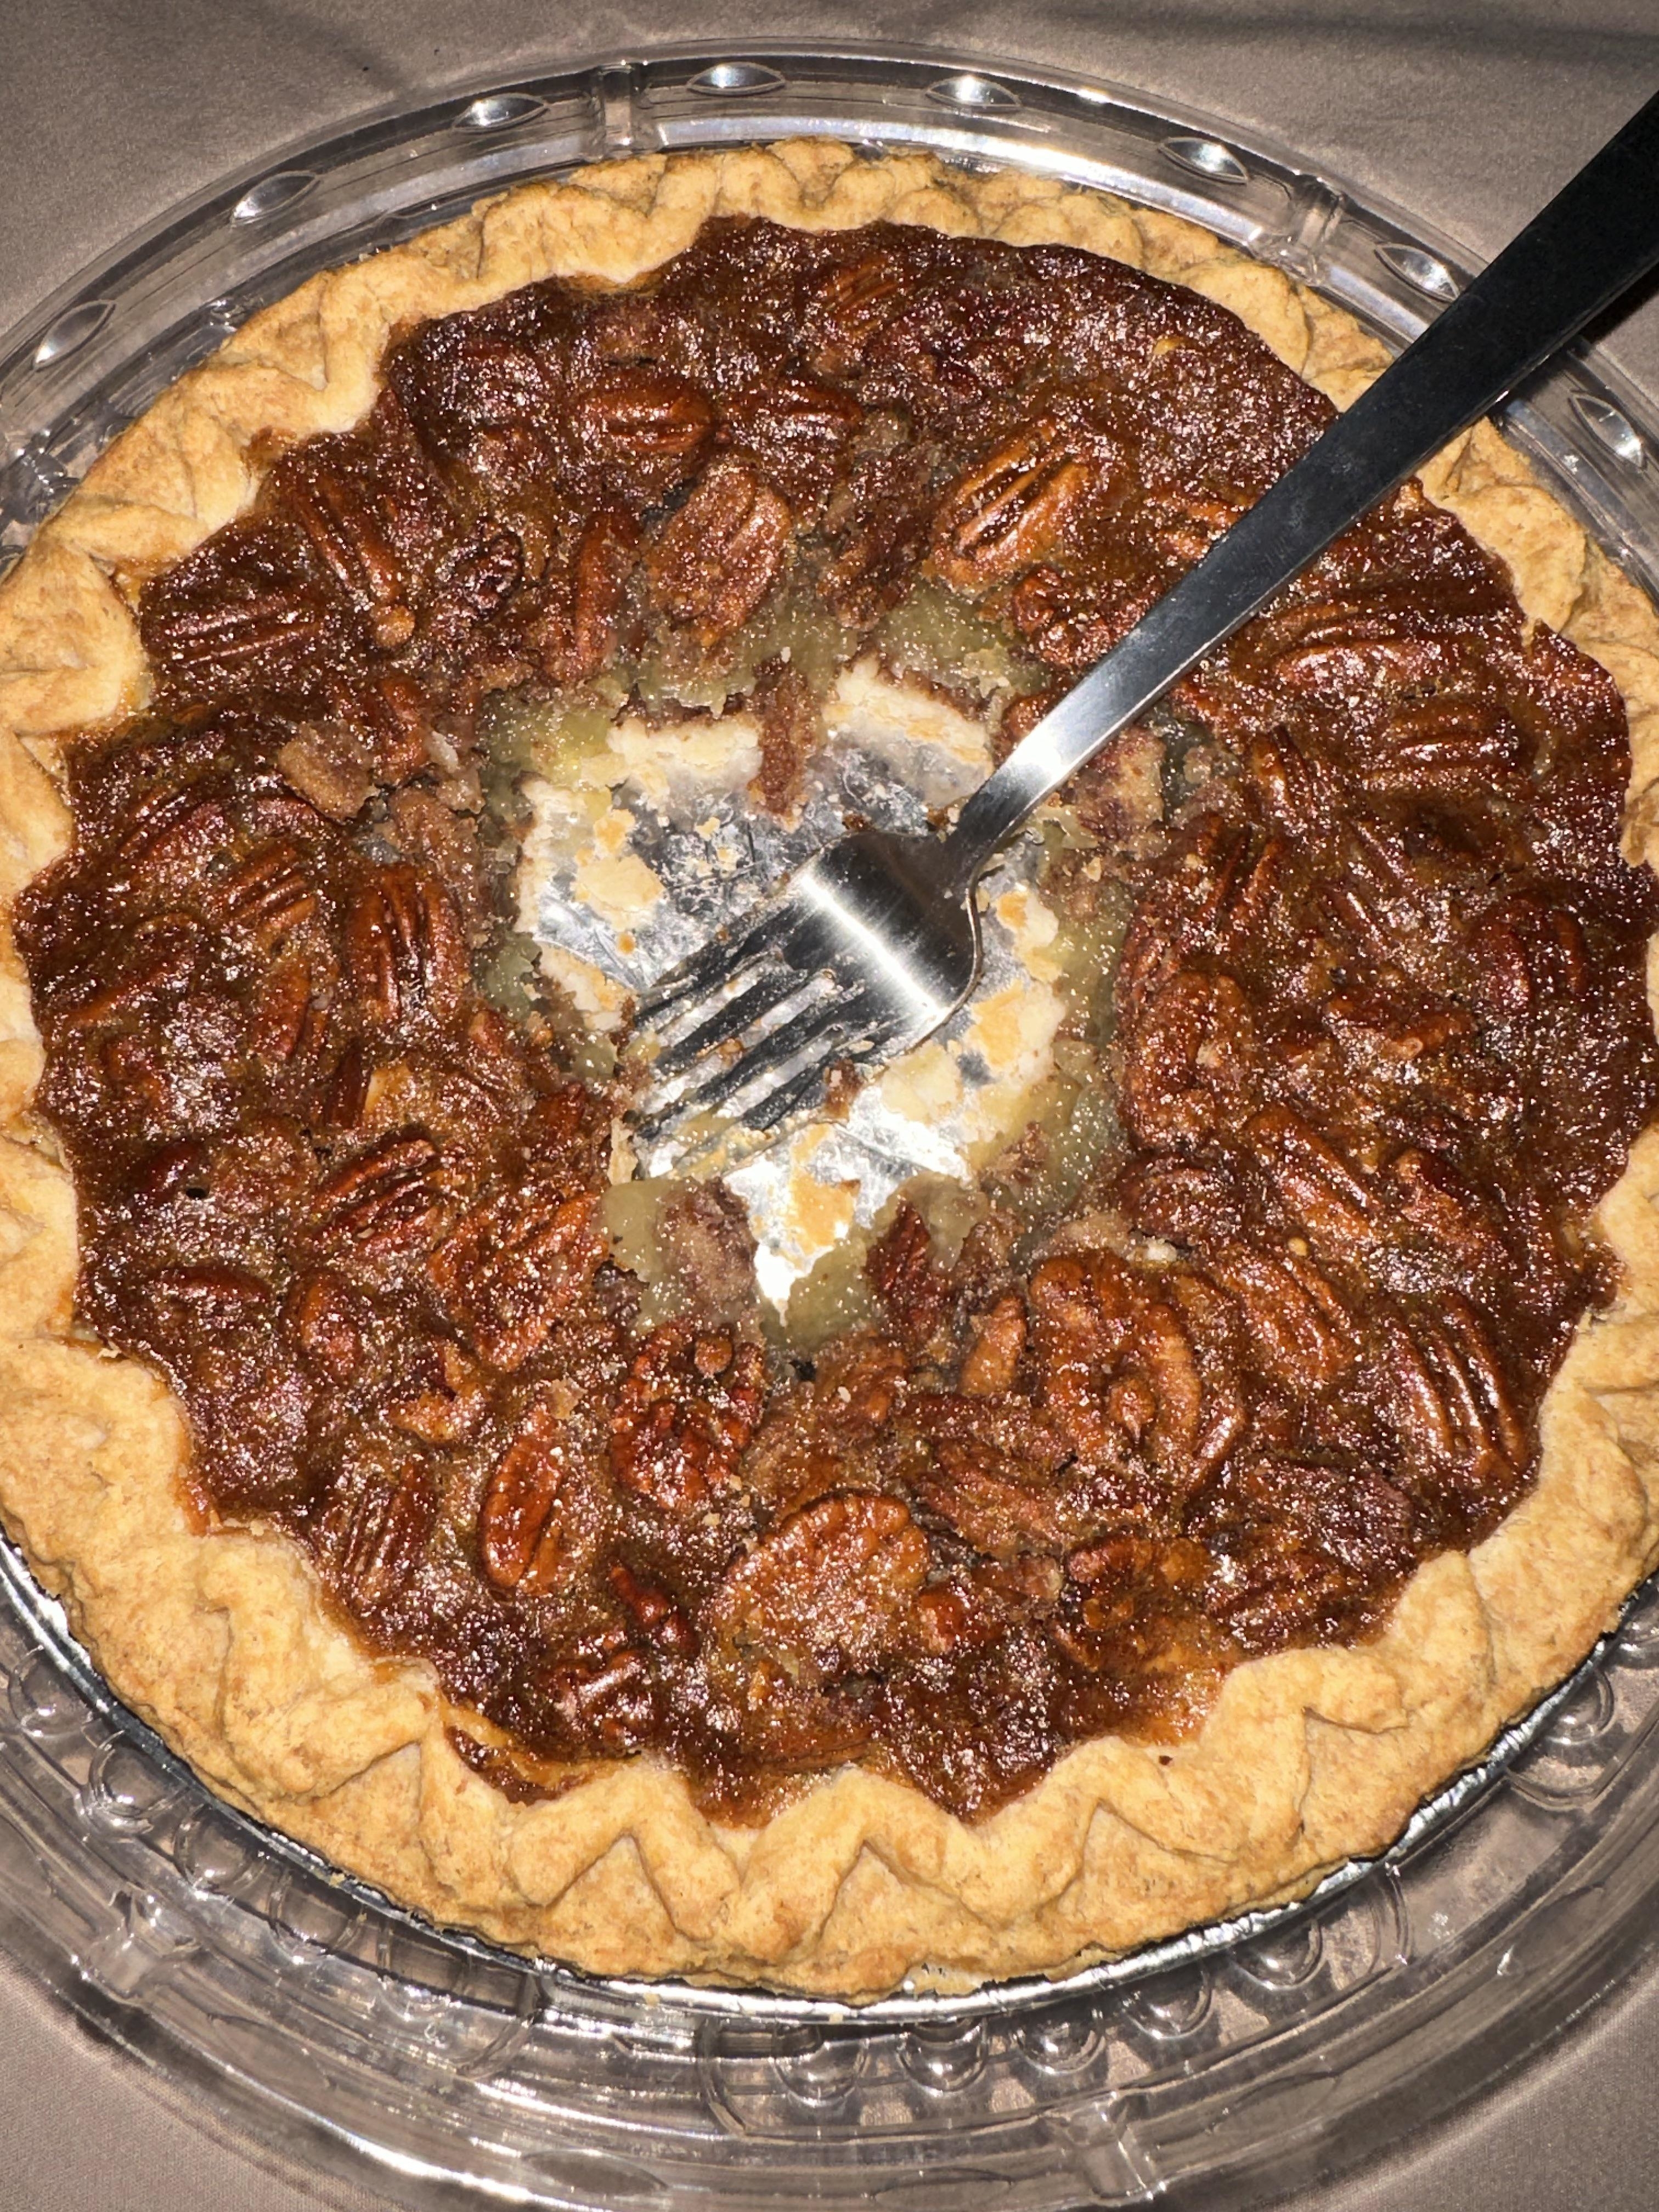 A freshly baked pecan pie with a slice missing, served in a clear pie container